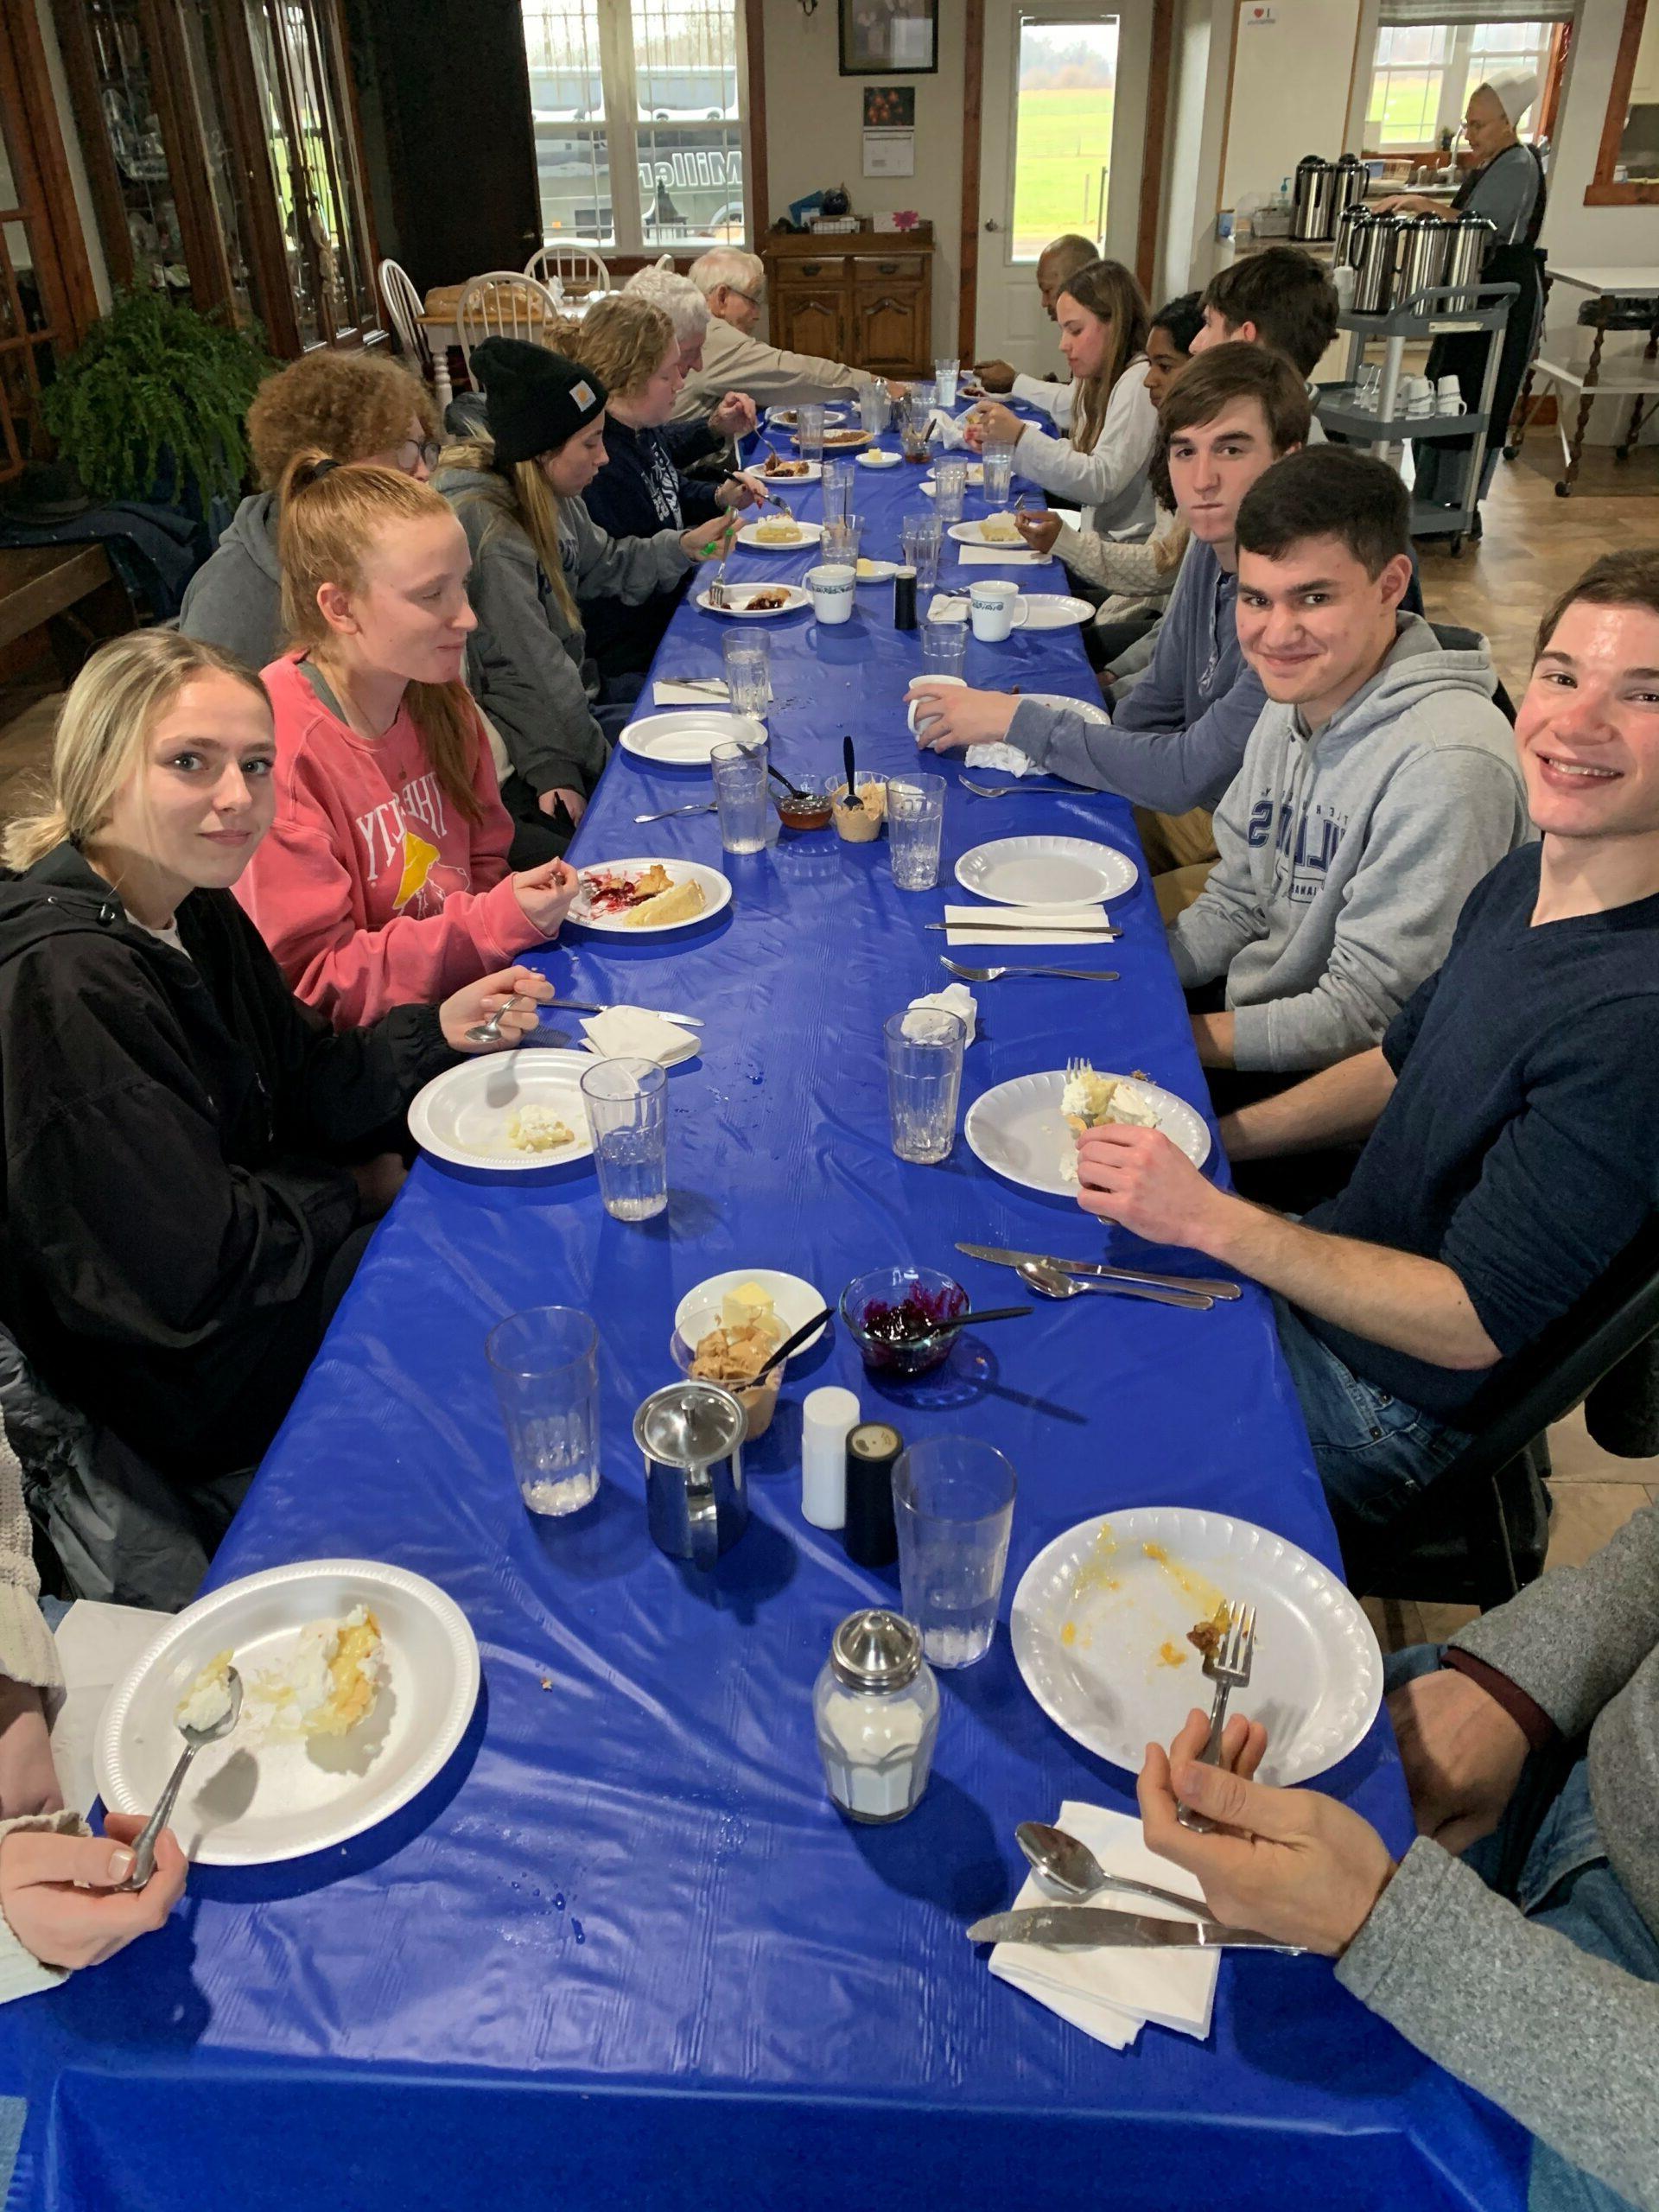 Students seated at dinner table